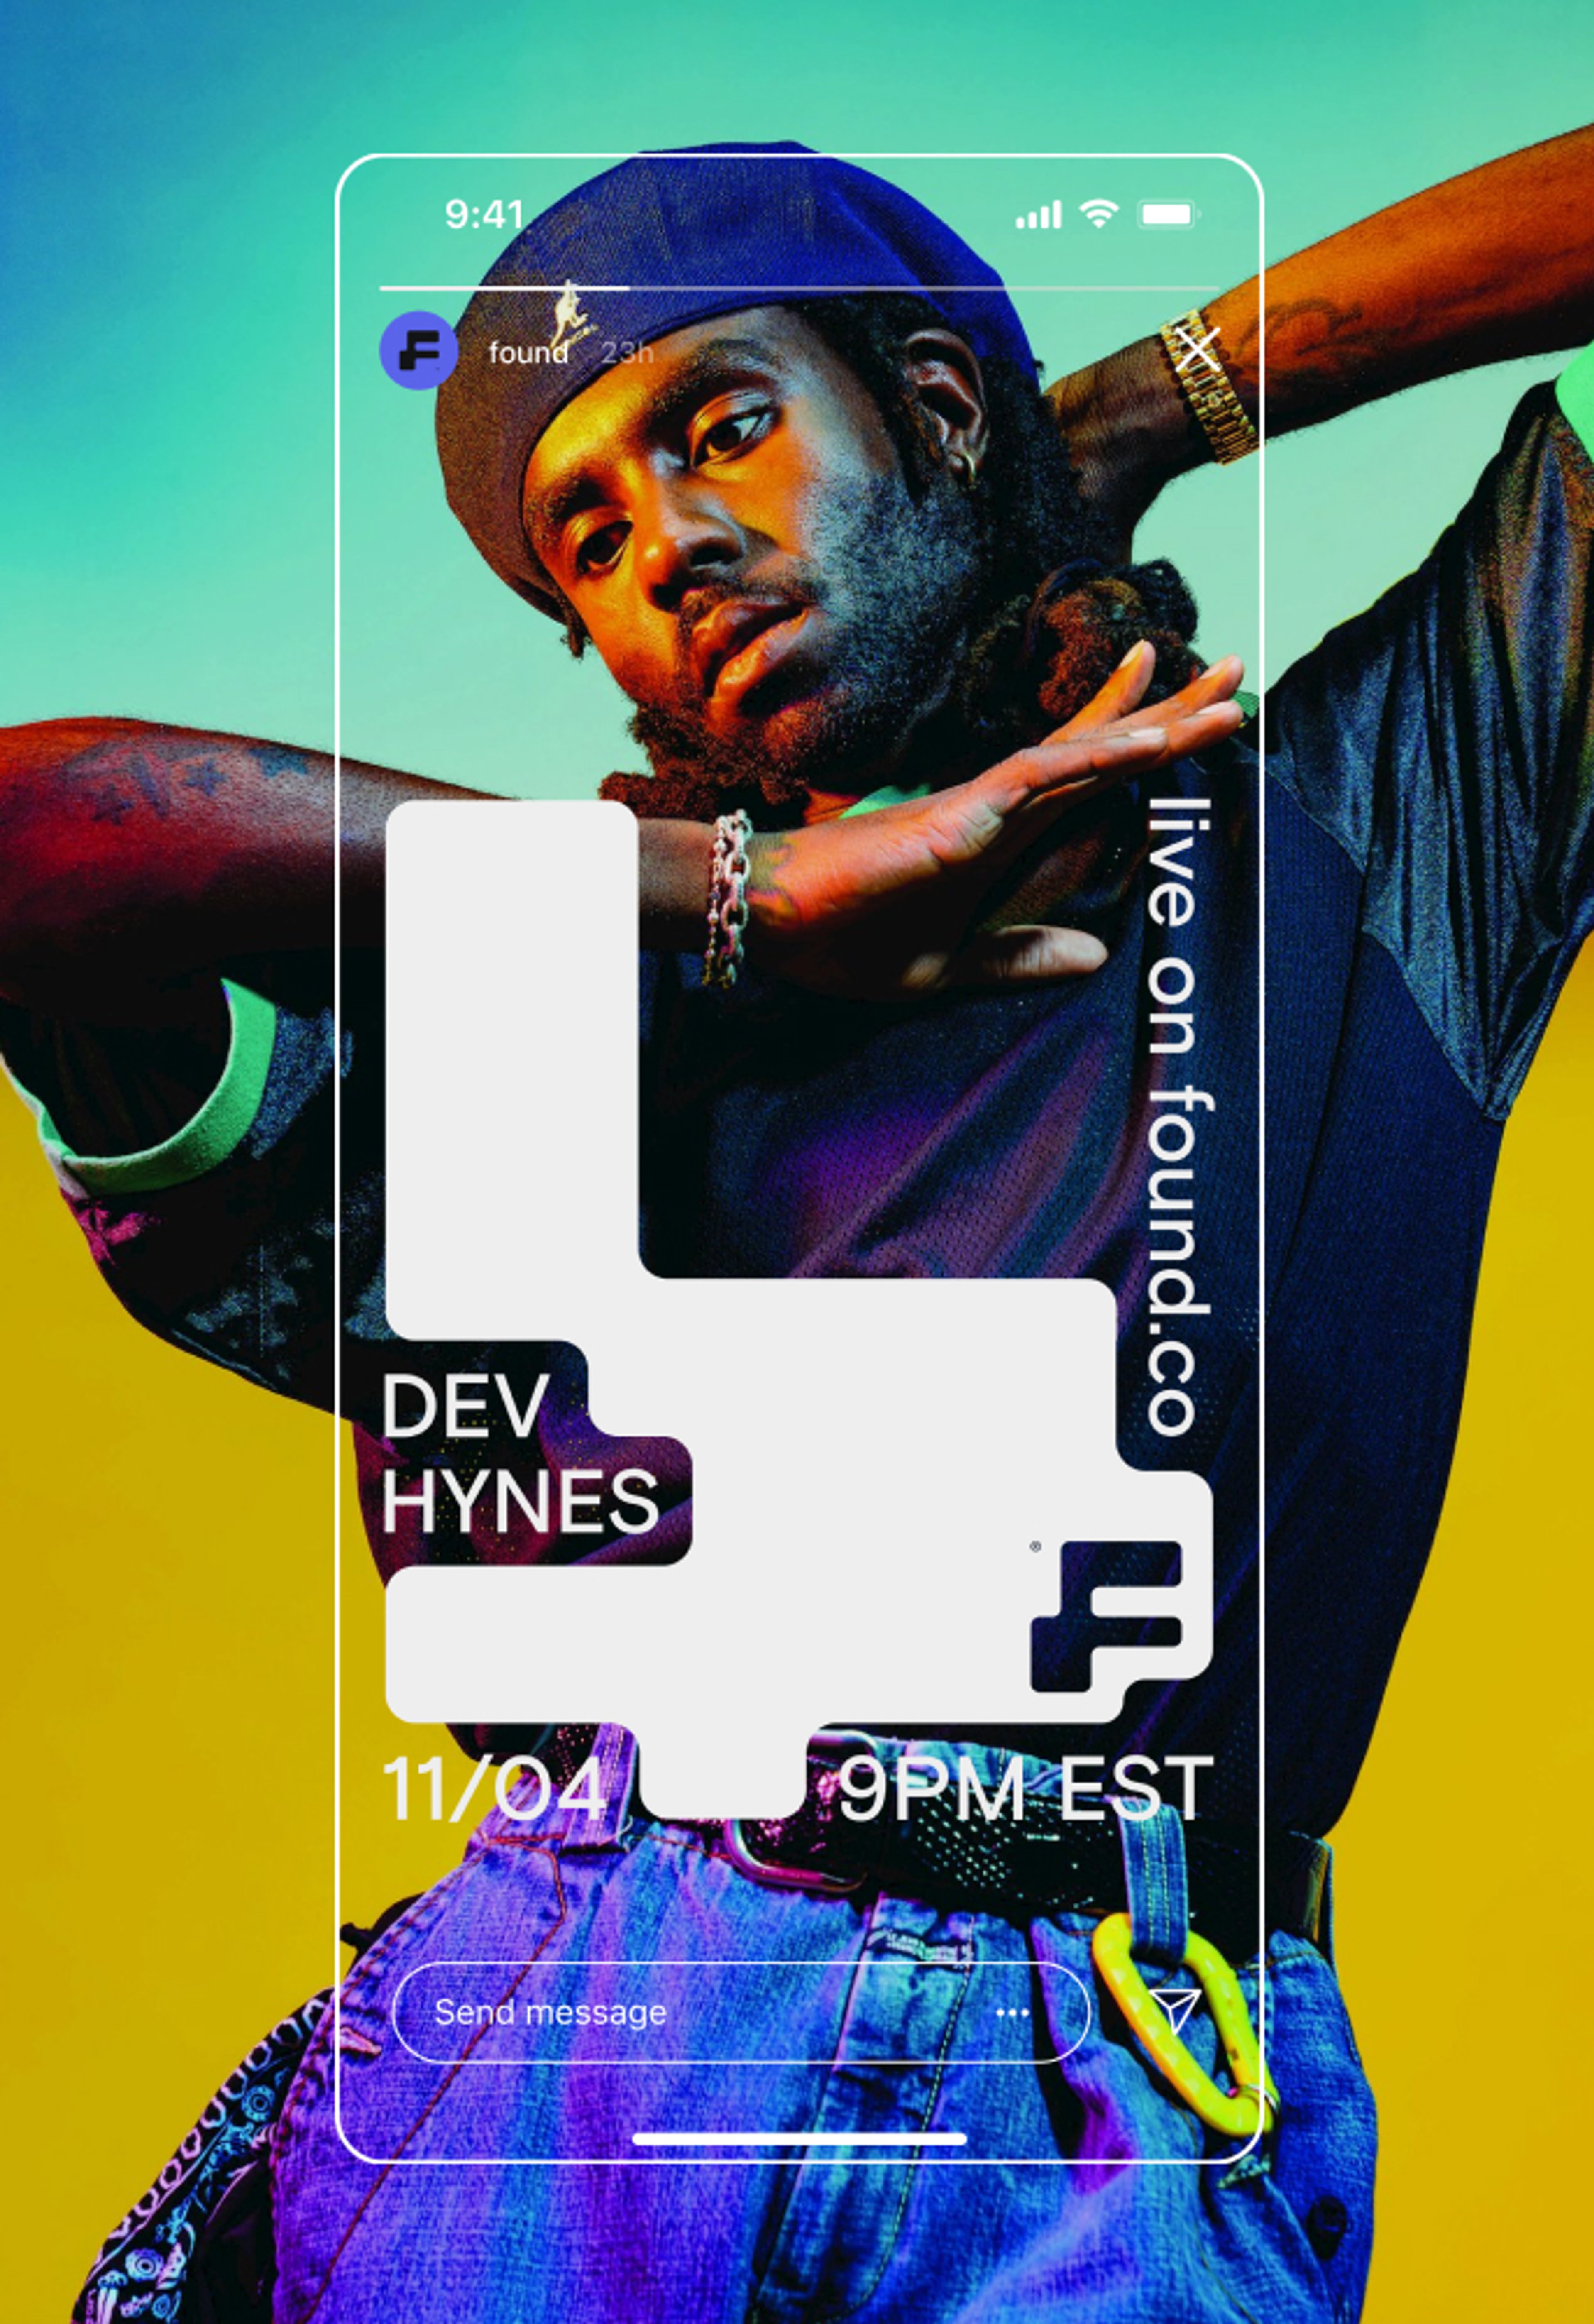 Graphic of Dev Hynes in the background with a white outlined version of the Found app overlayed